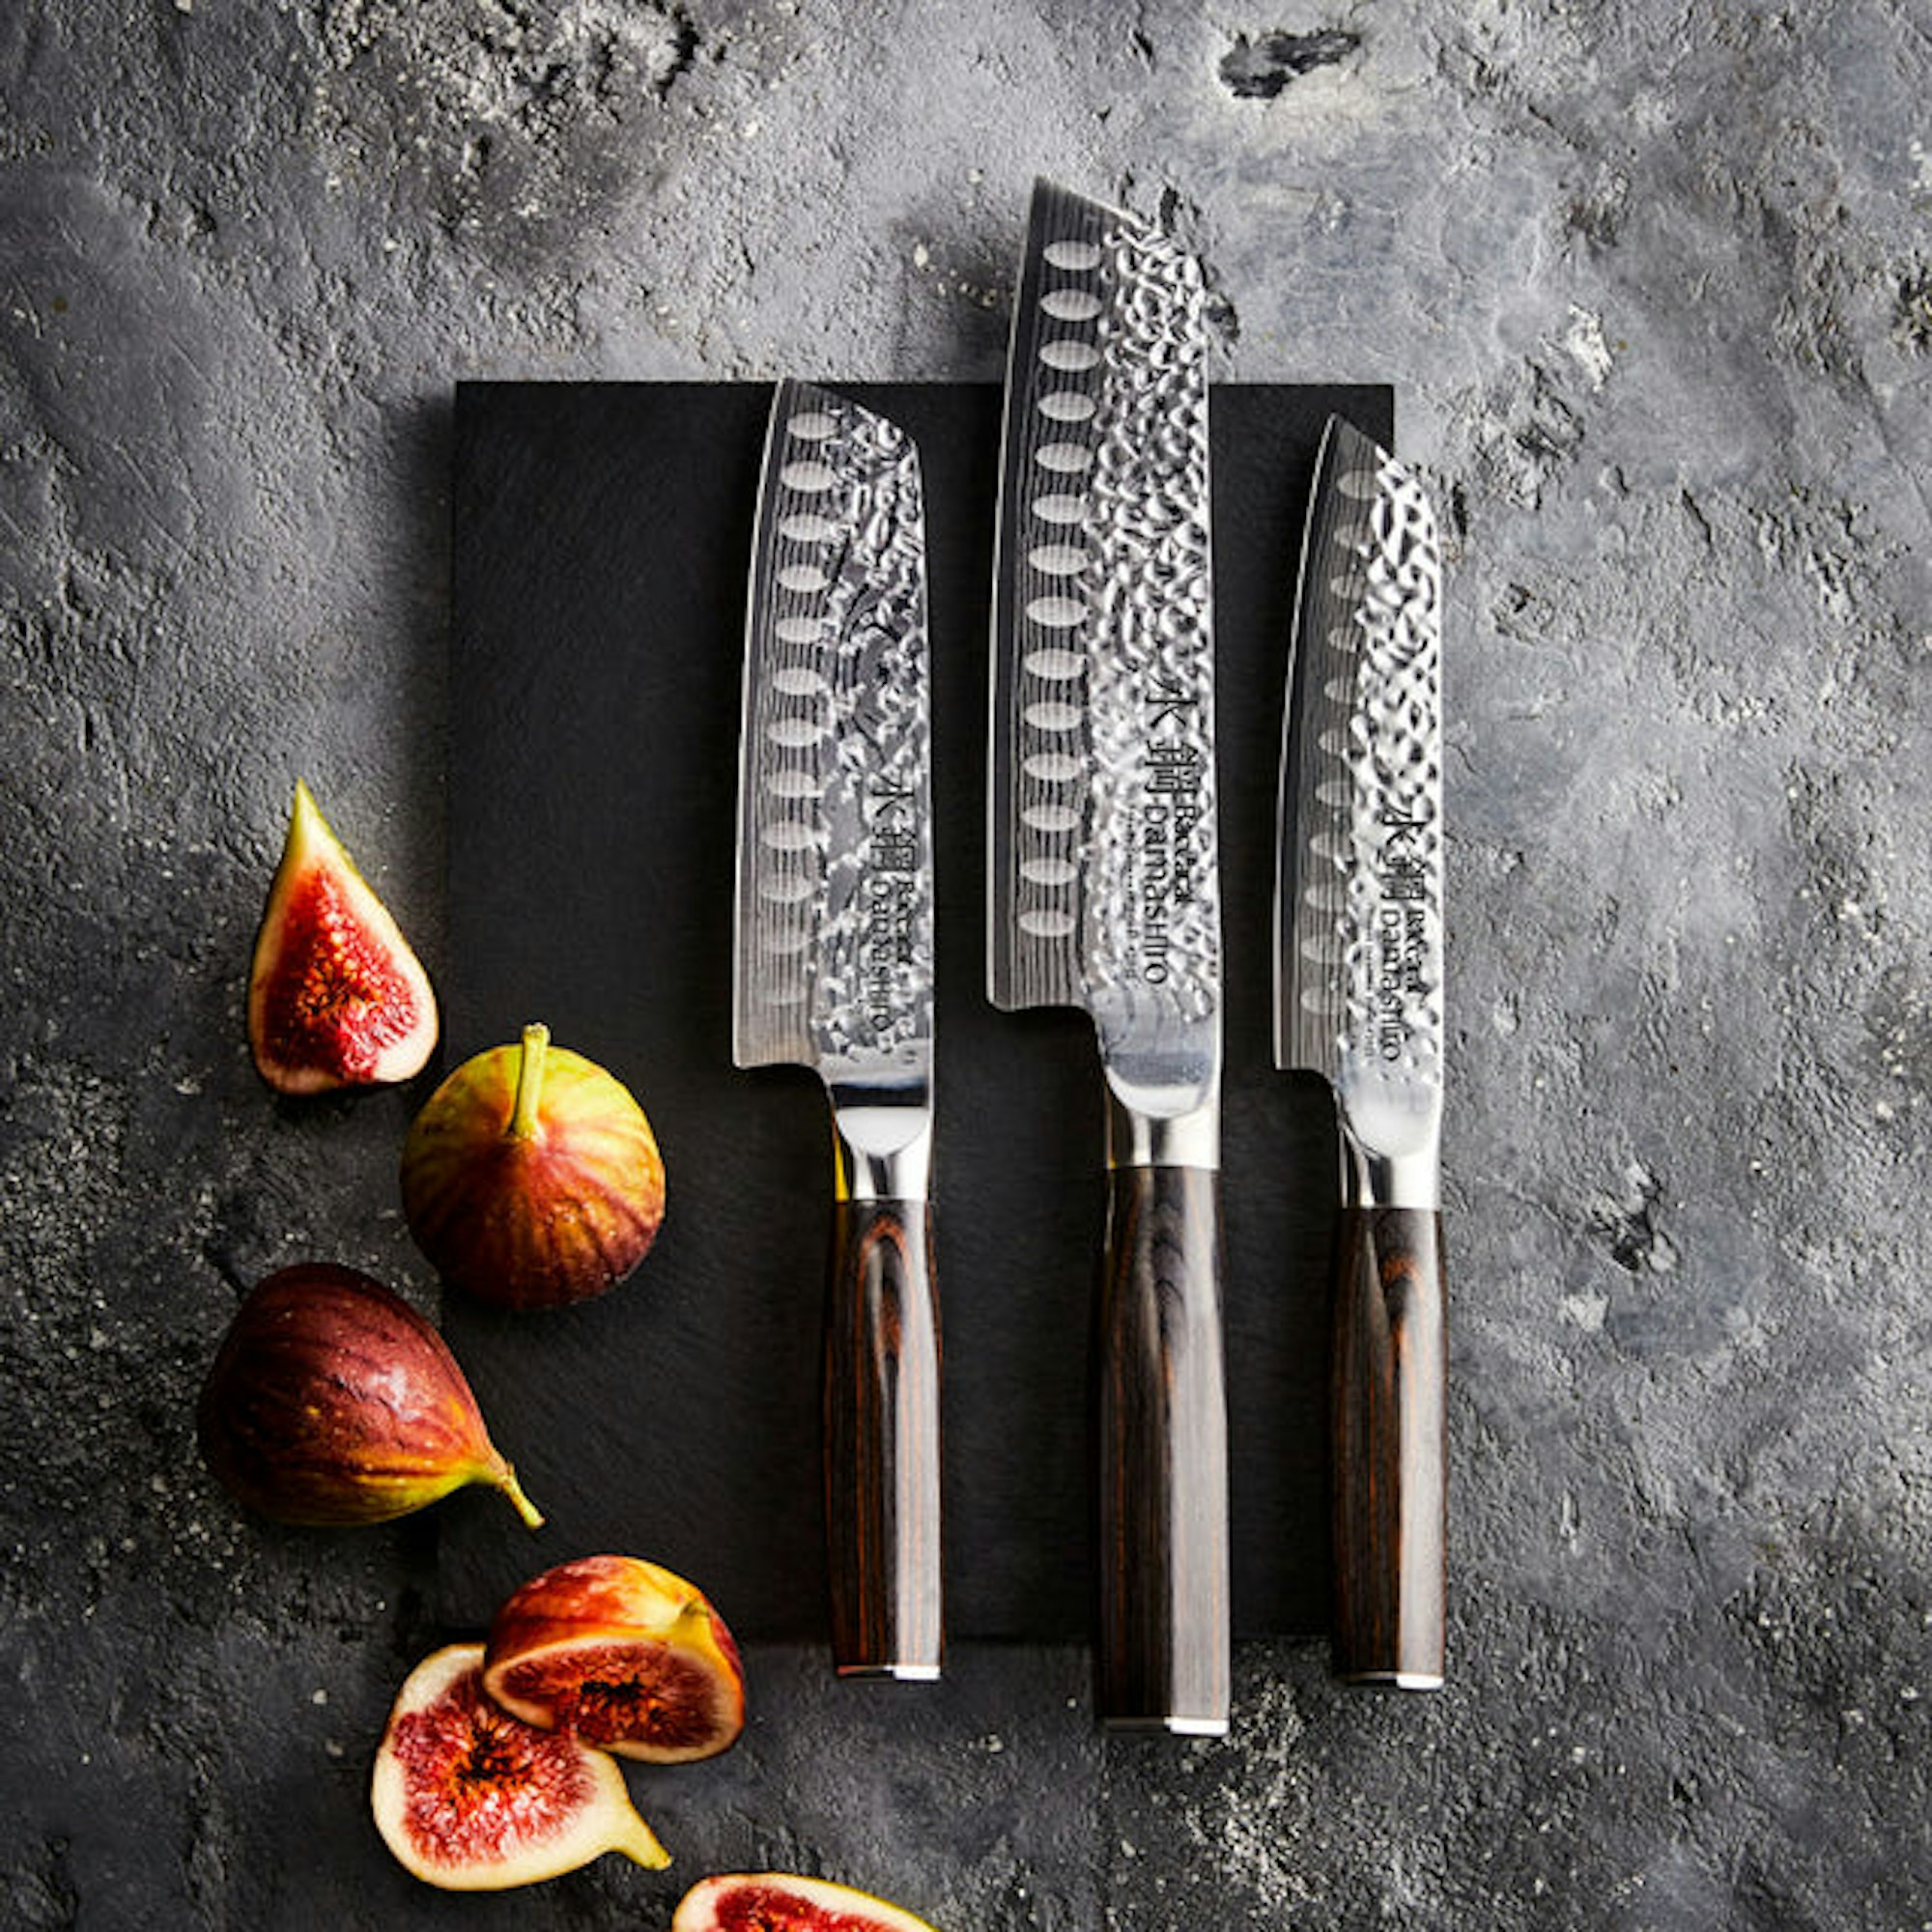 santoku knives in various sizes on a chopping board with figs